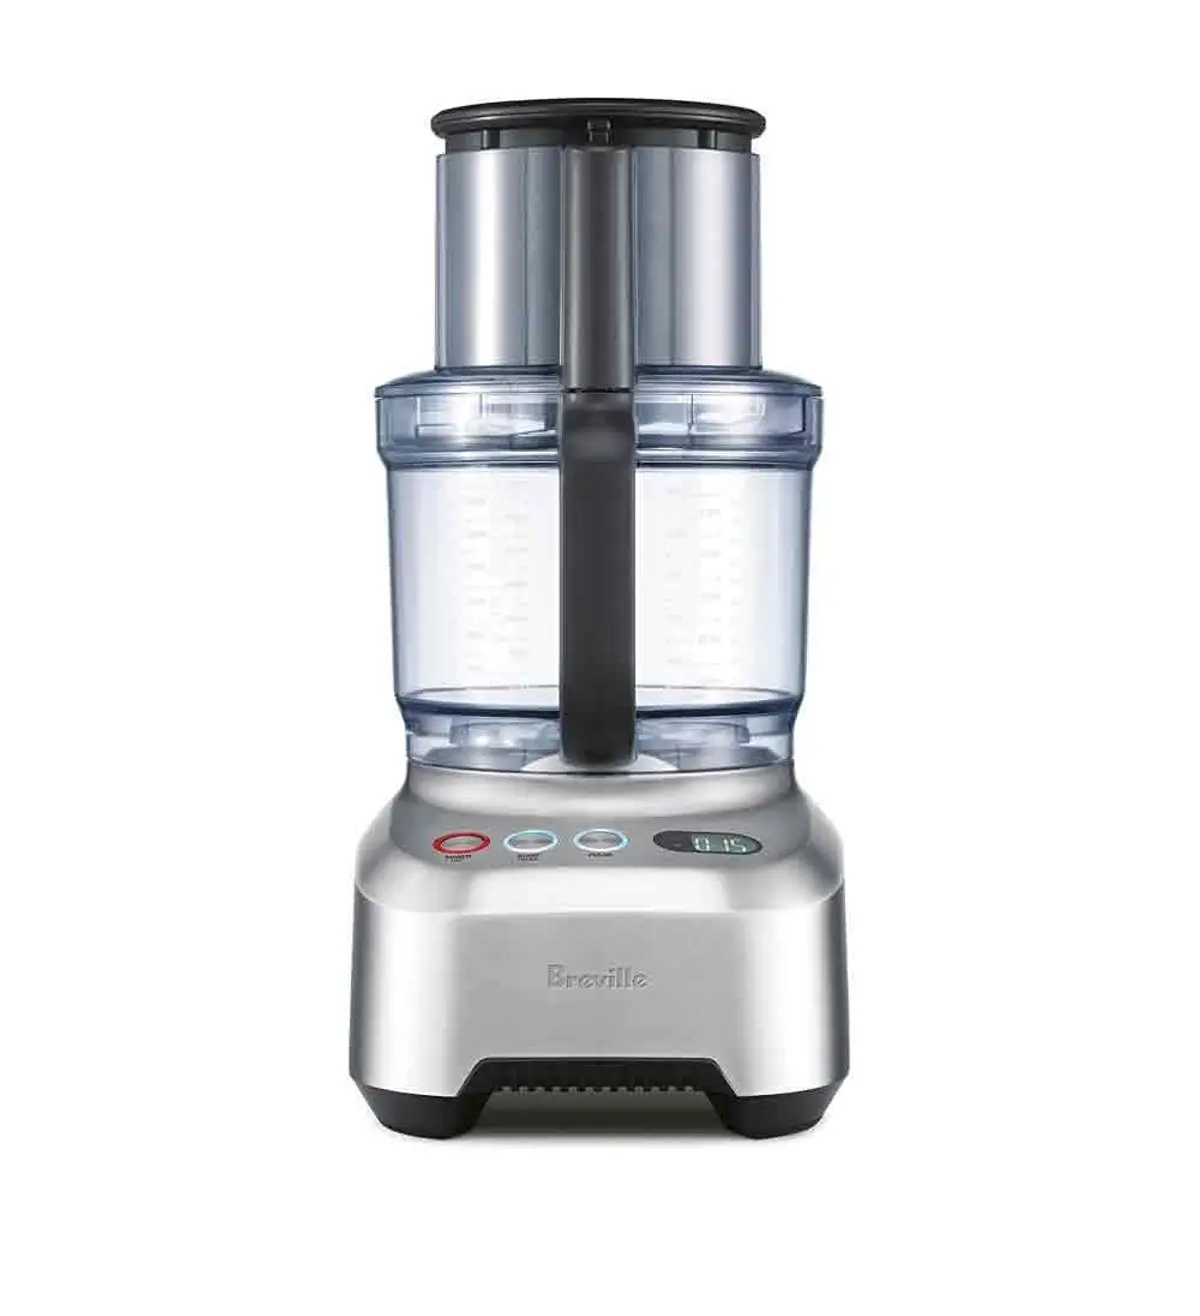 The Breville BFP800XL Food Processor Review